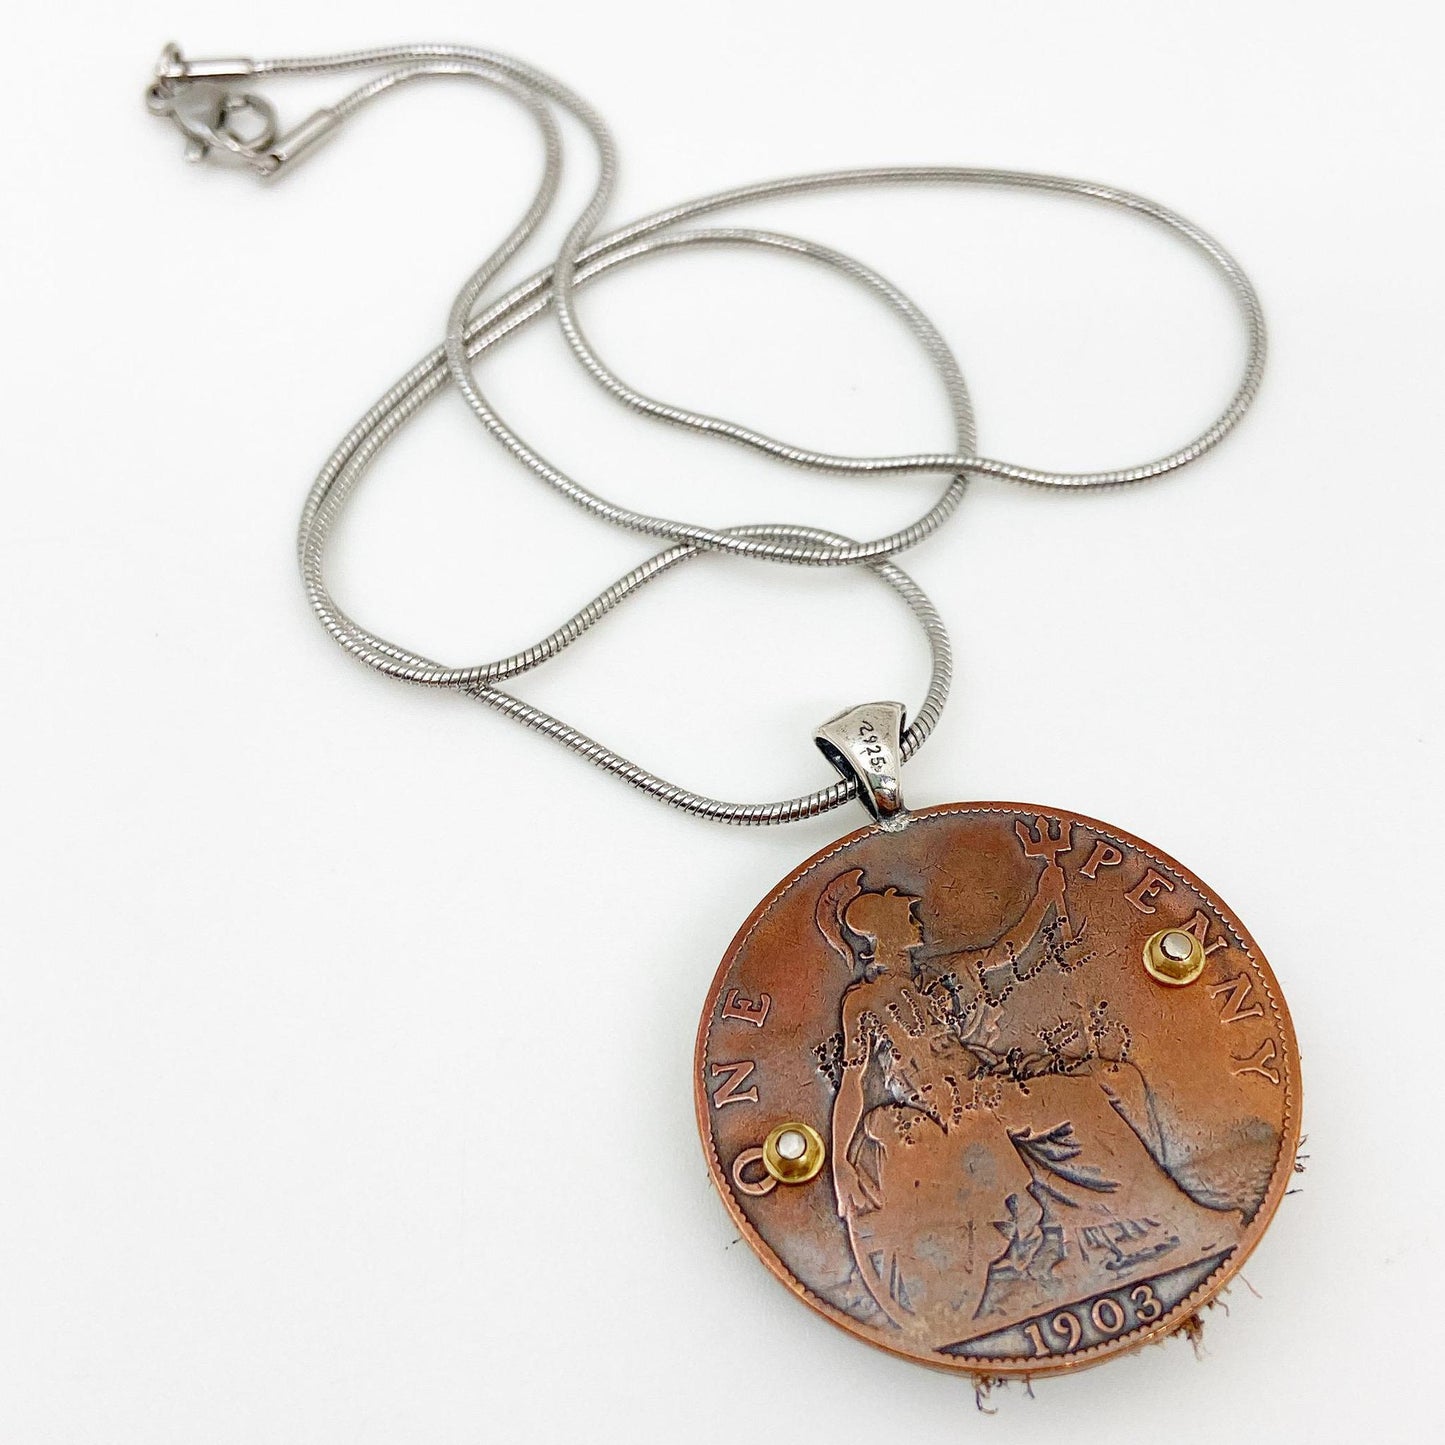 Necklace - Reclining Dog - Enamel on Copper & Coin